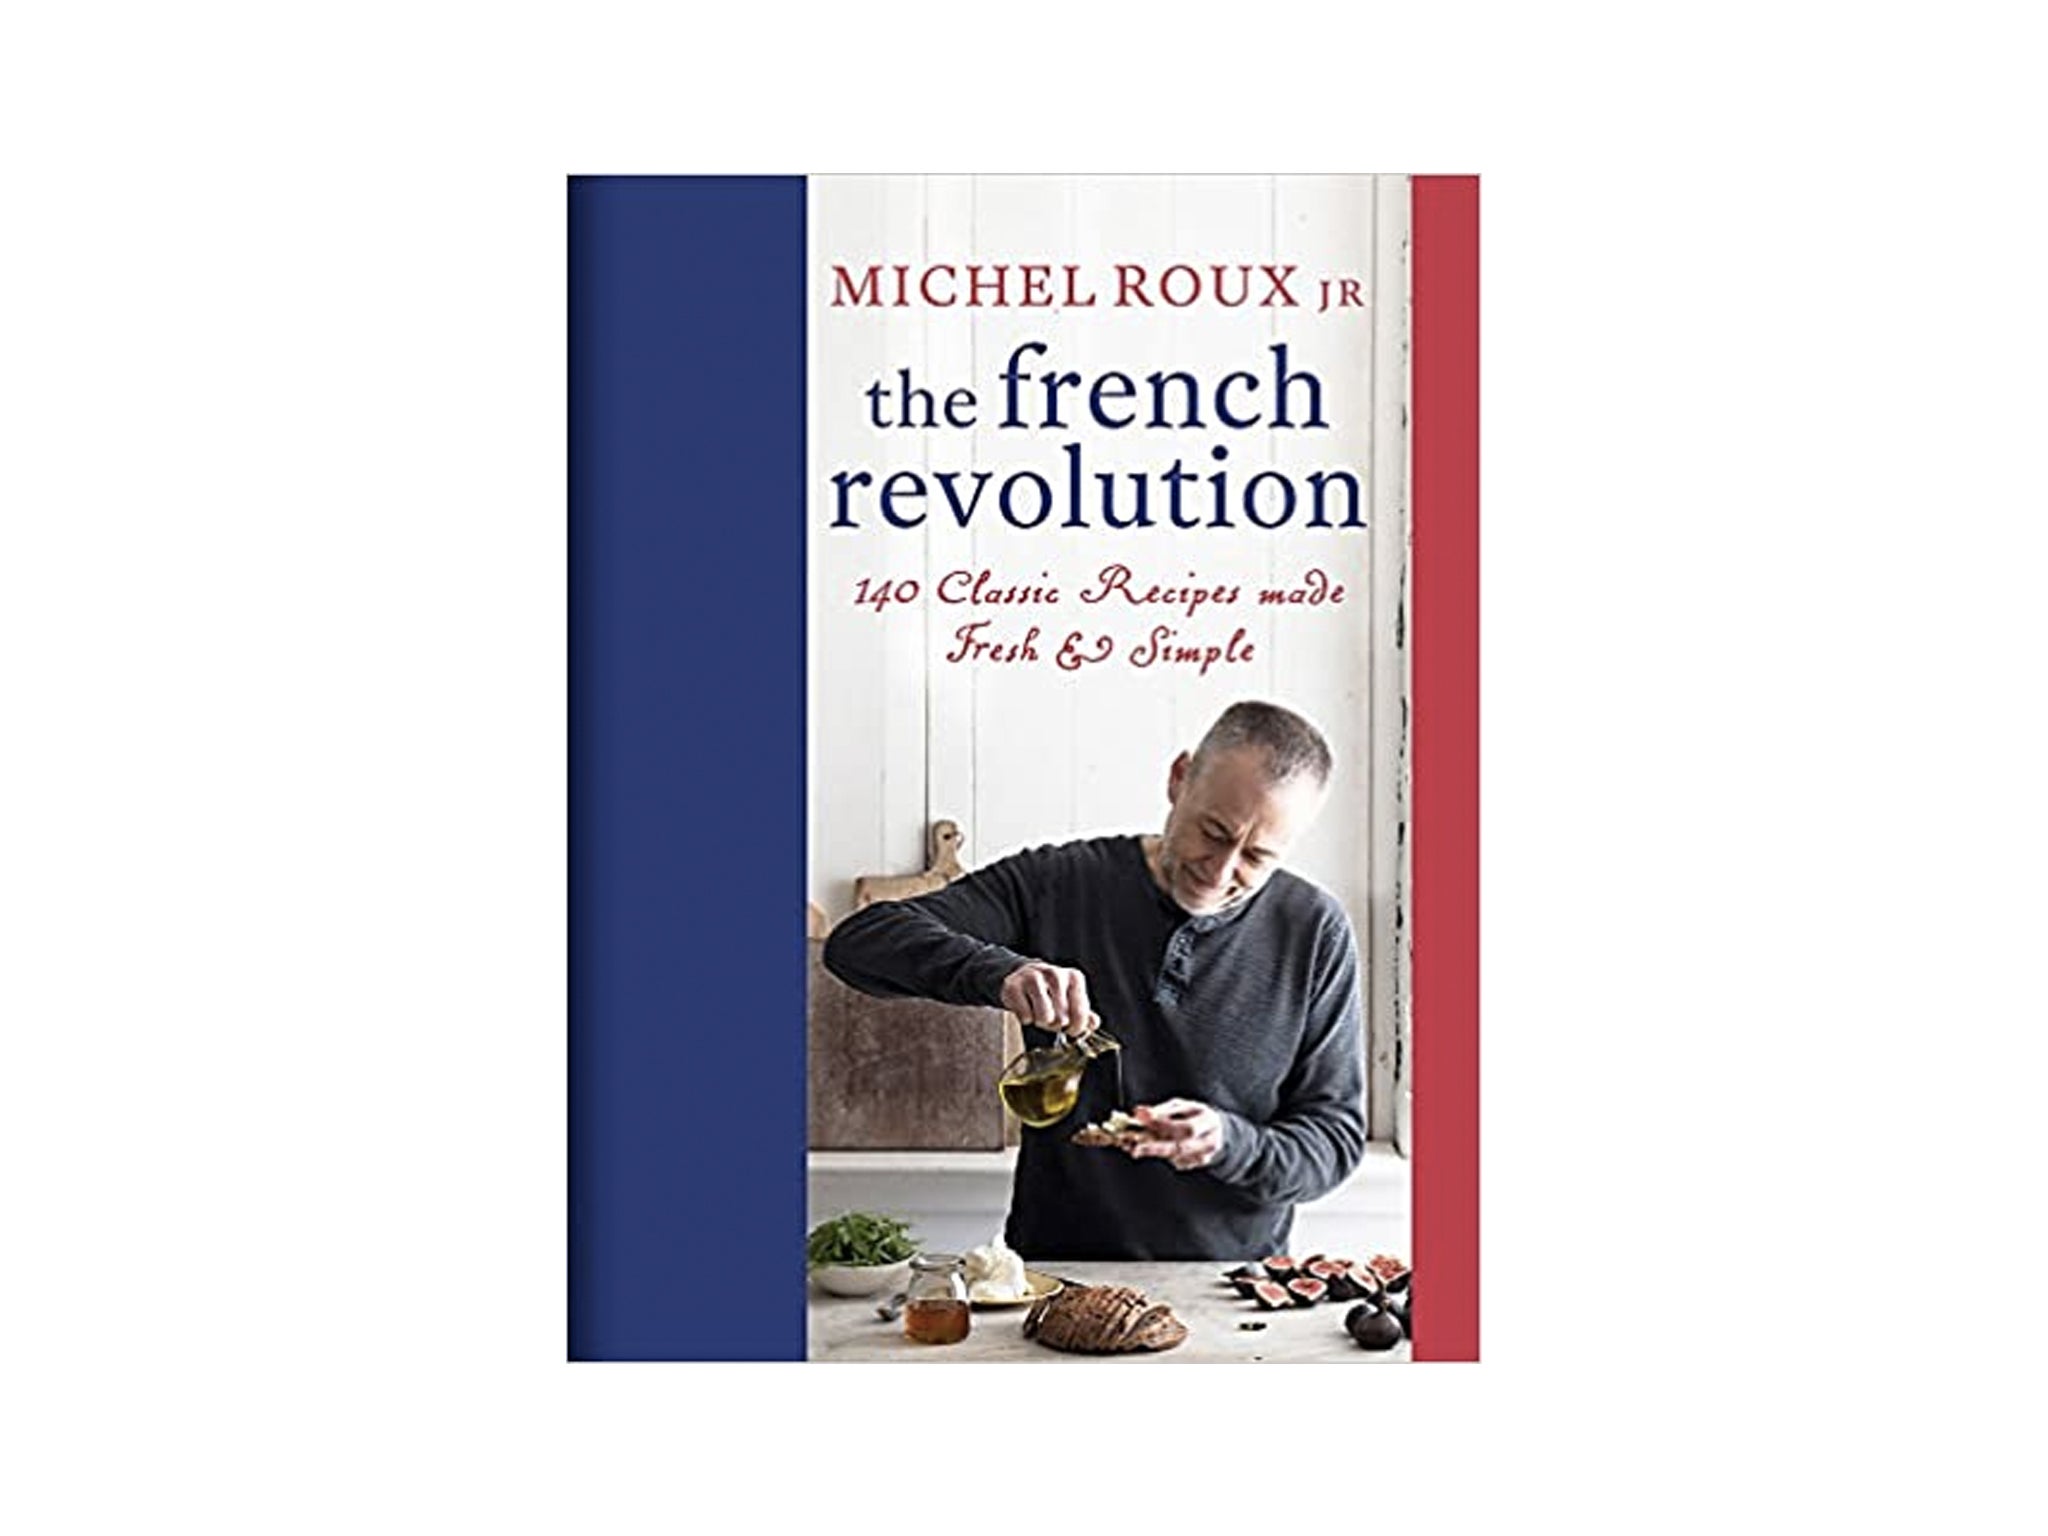 The French Revolution- 140 Classic Recipes made Fresh & Simple.jpg